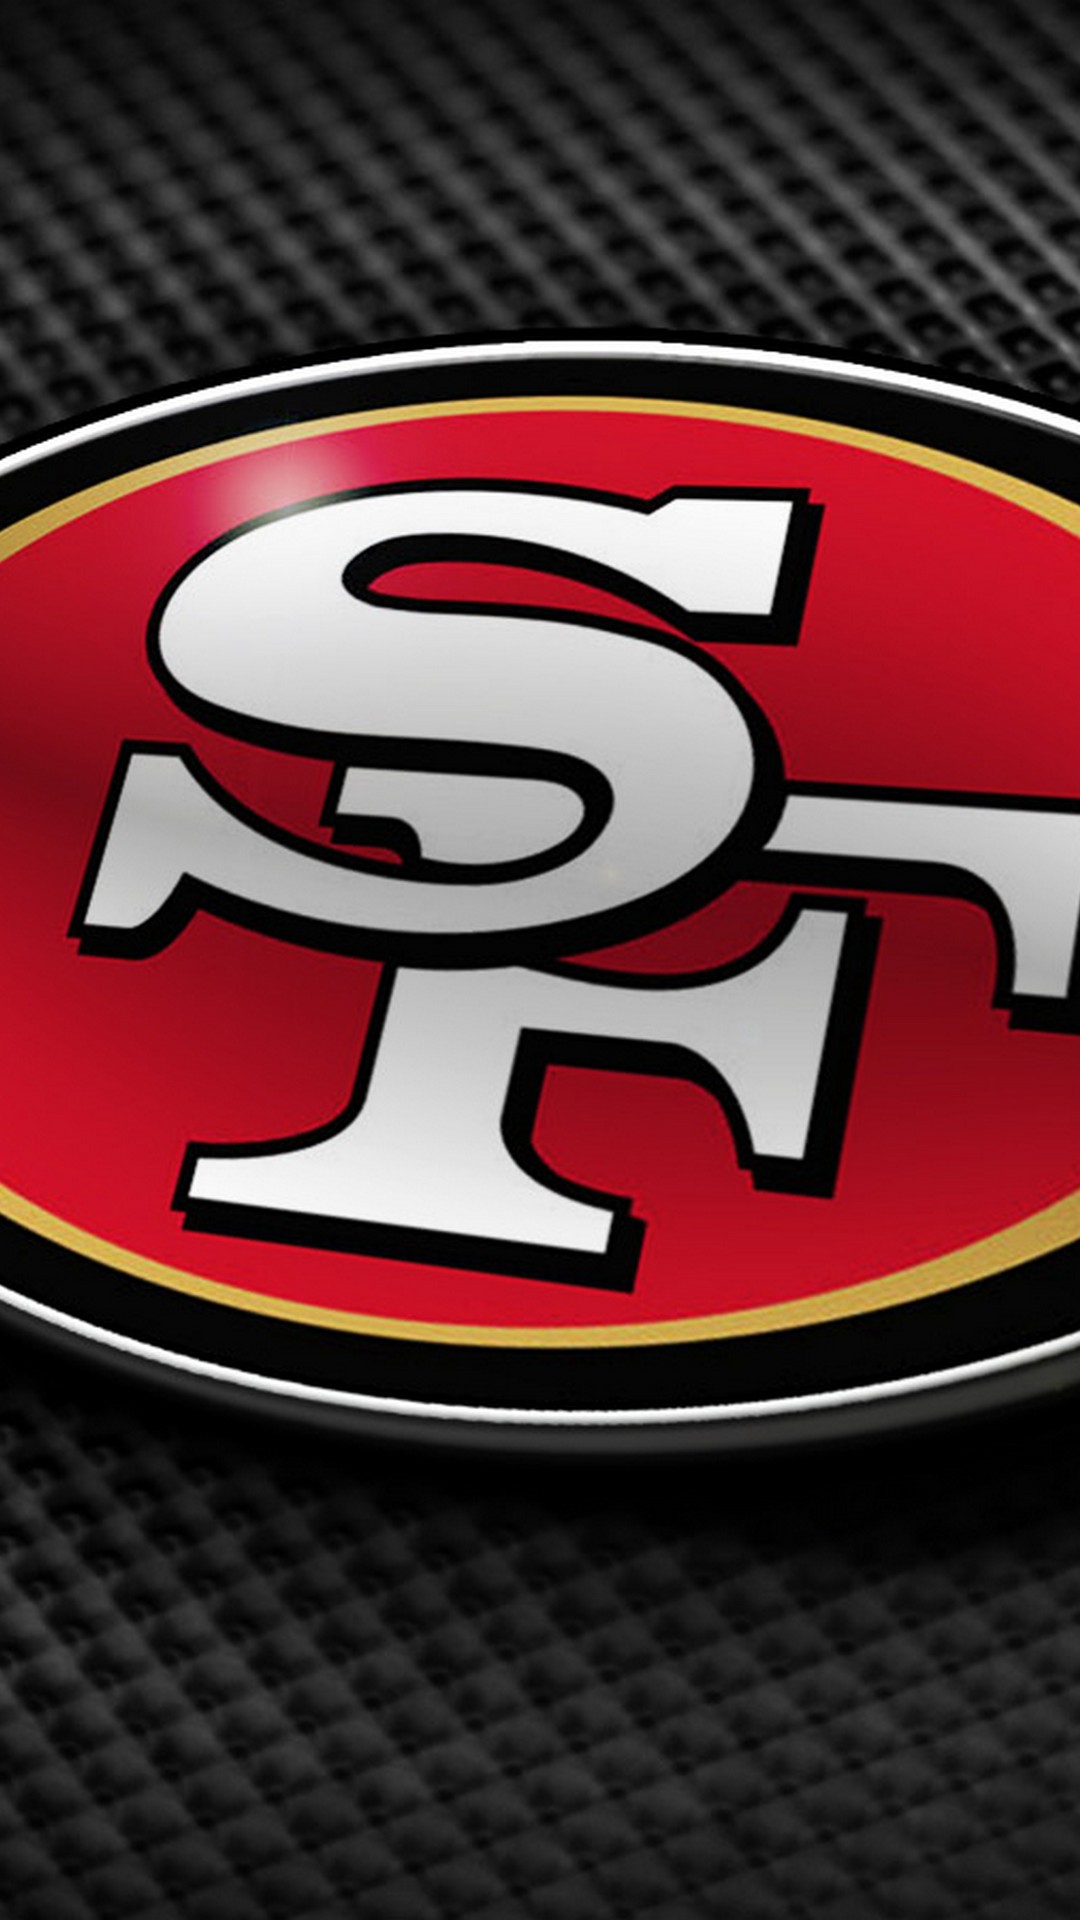 San Francisco 49ers NFL iPhone Wallpaper High Quality with high-resolution 1080x1920 pixel. Donwload and set as wallpaper for your iPhone X, iPhone XS home screen backgrounds, XS Max, XR, iPhone8 lock screen wallpaper, iPhone 7, 6, SE and other mobile devices